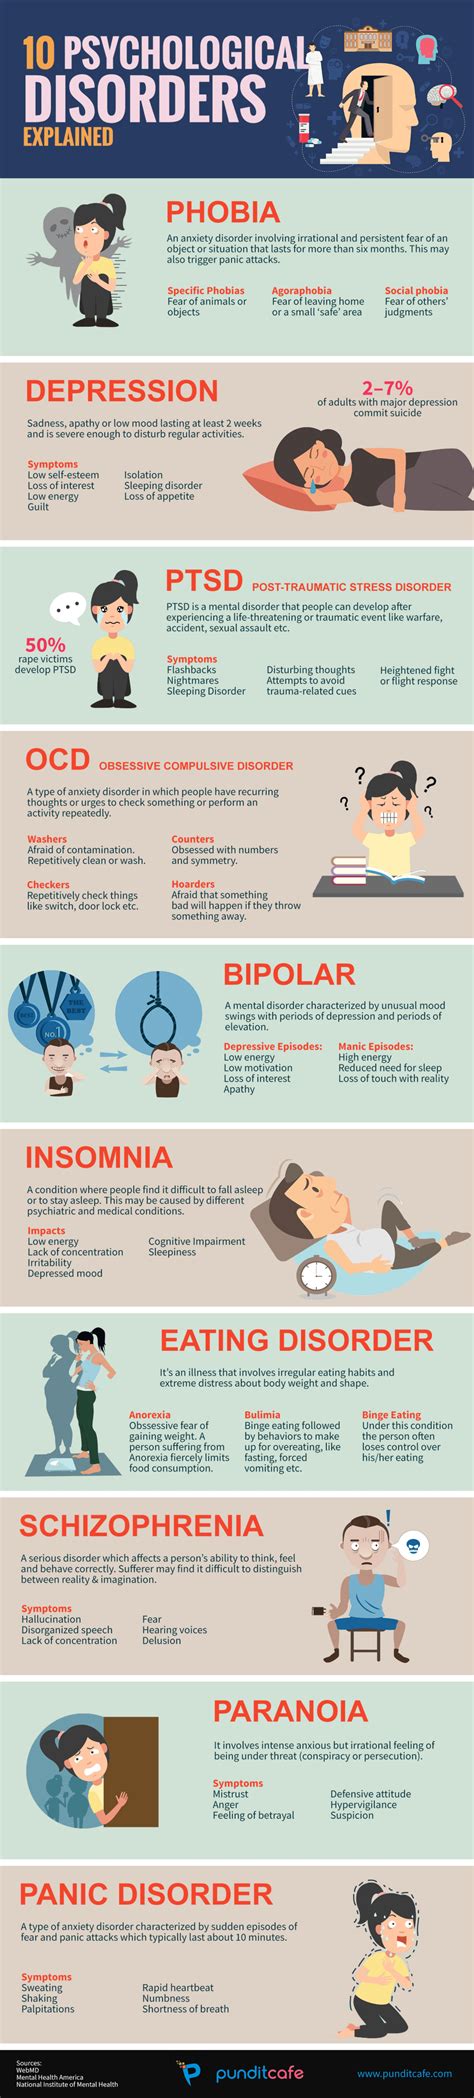 psychological disorders explained infographic visualistan